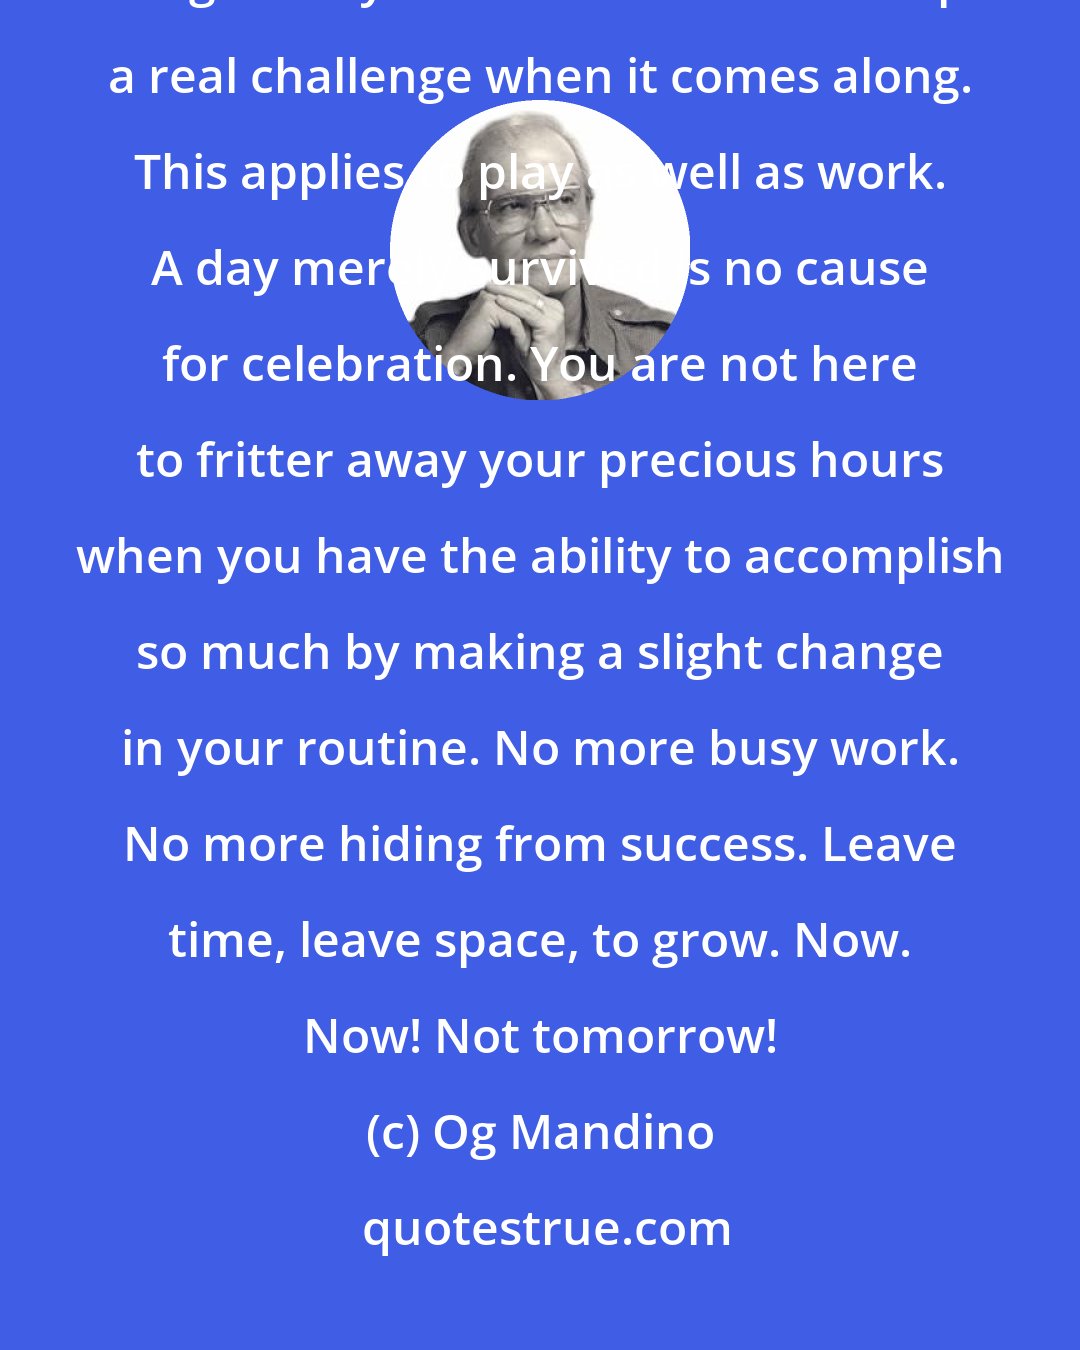 Og Mandino: Never again clutter your days or nights with so many menial and unimportant things that you have no time to accept a real challenge when it comes along. This applies to play as well as work. A day merely survived is no cause for celebration. You are not here to fritter away your precious hours when you have the ability to accomplish so much by making a slight change in your routine. No more busy work. No more hiding from success. Leave time, leave space, to grow. Now. Now! Not tomorrow!